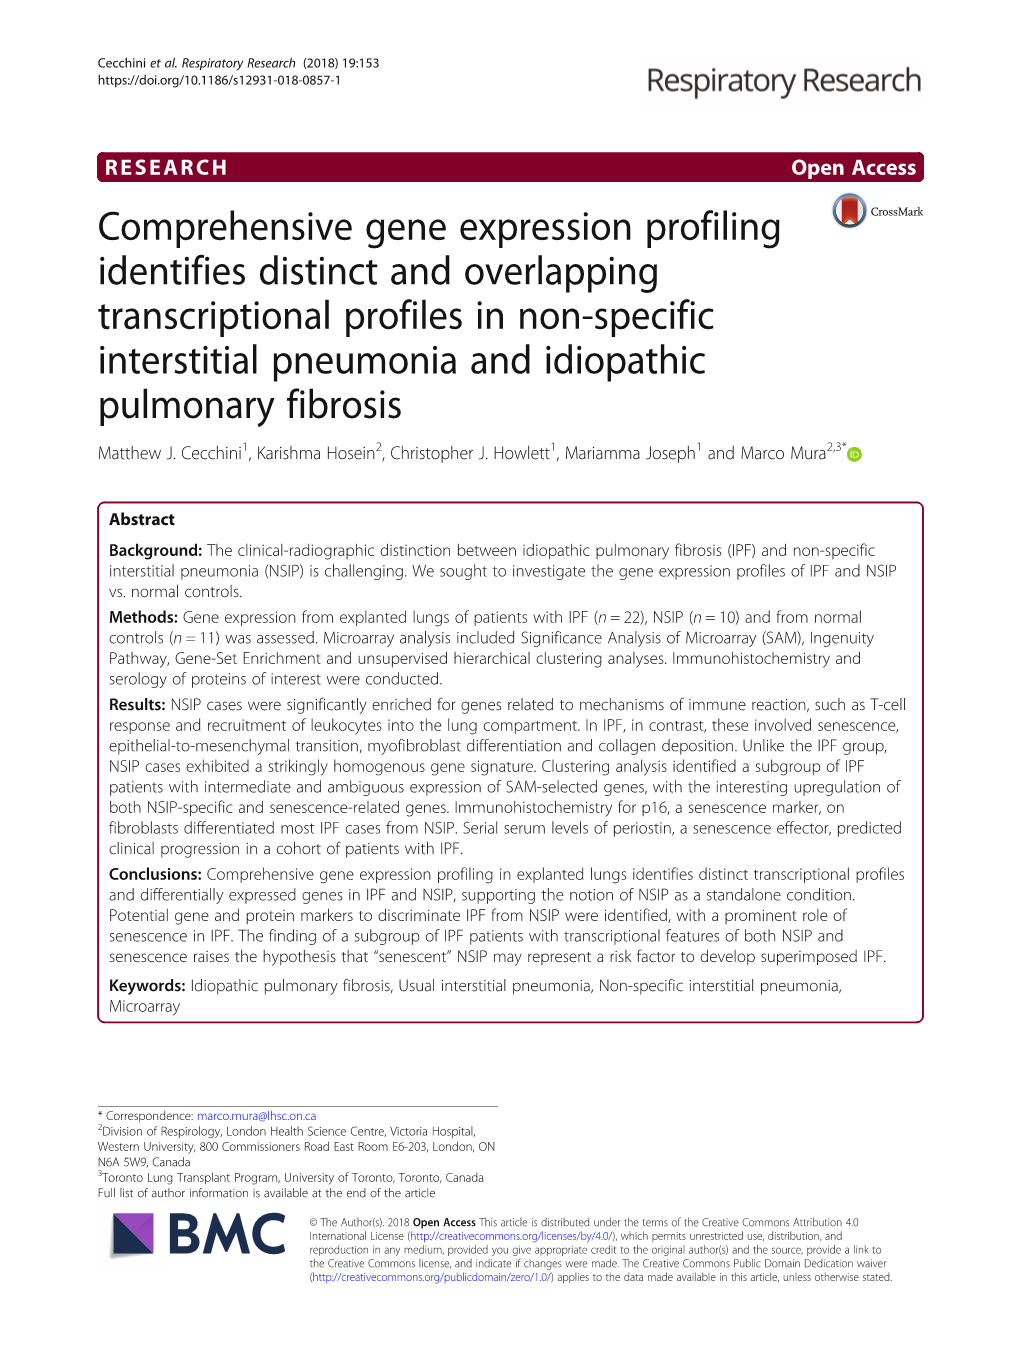 Comprehensive Gene Expression Profiling Identifies Distinct And